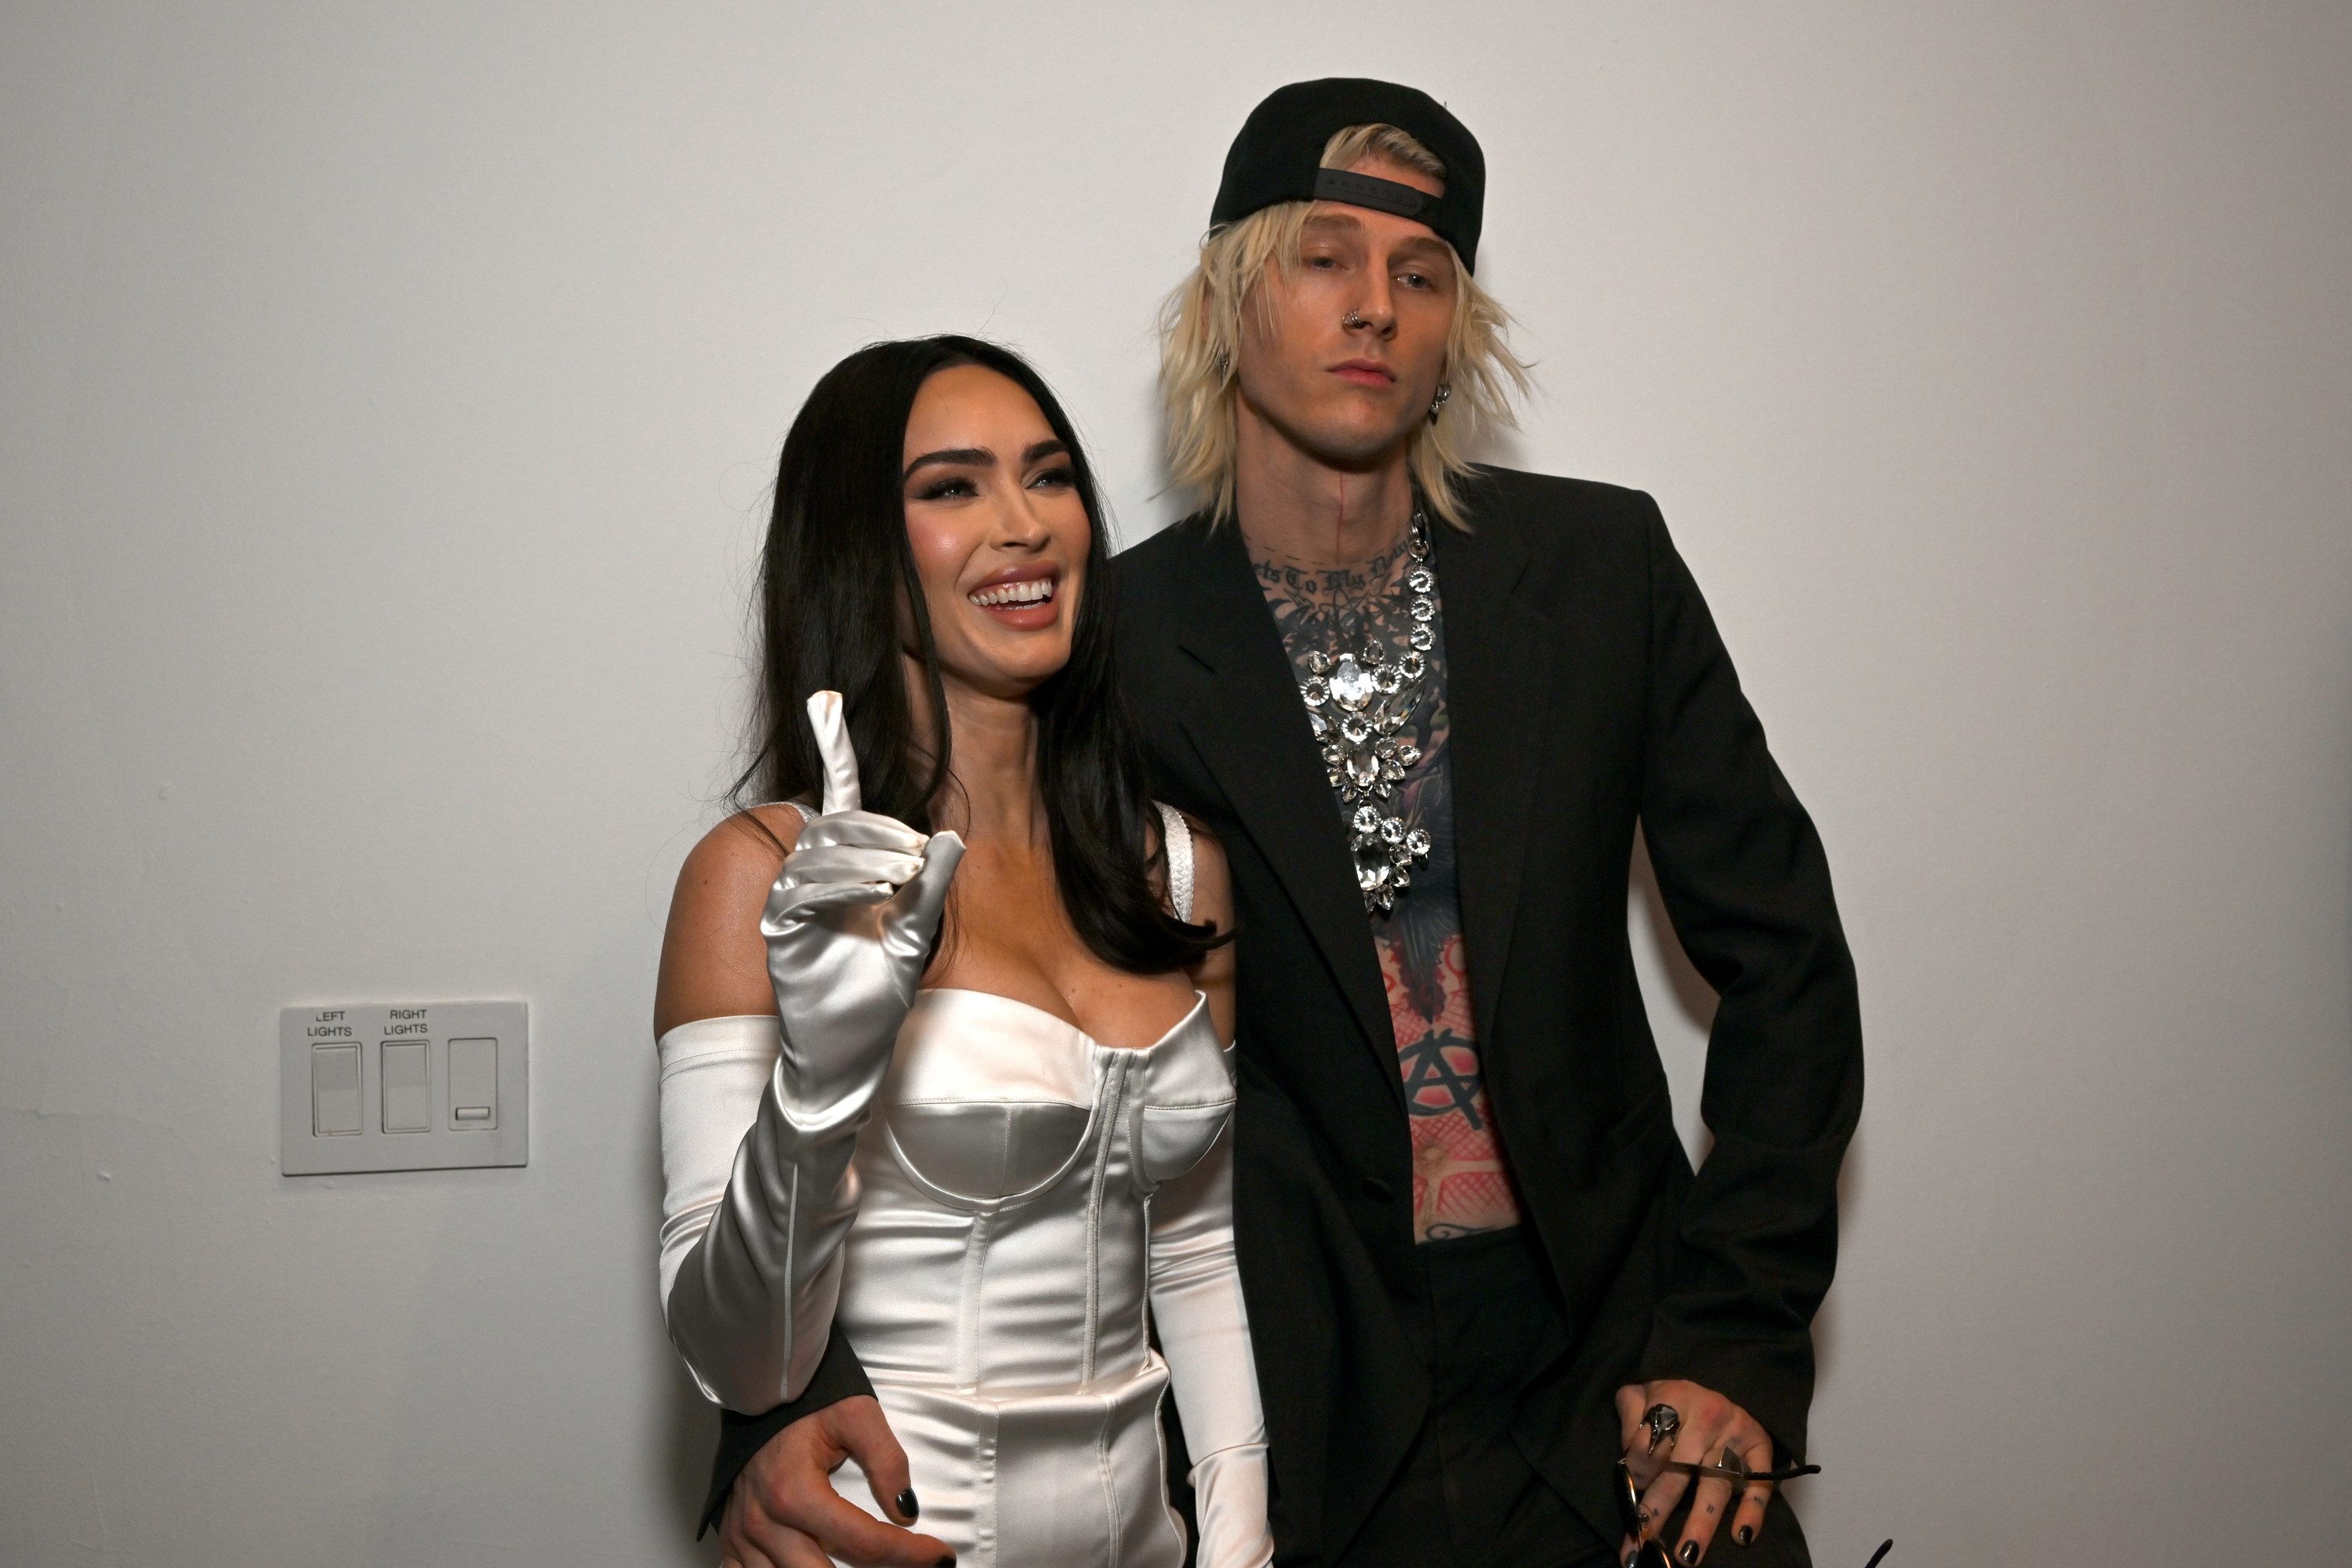 Megan smiling with MGK